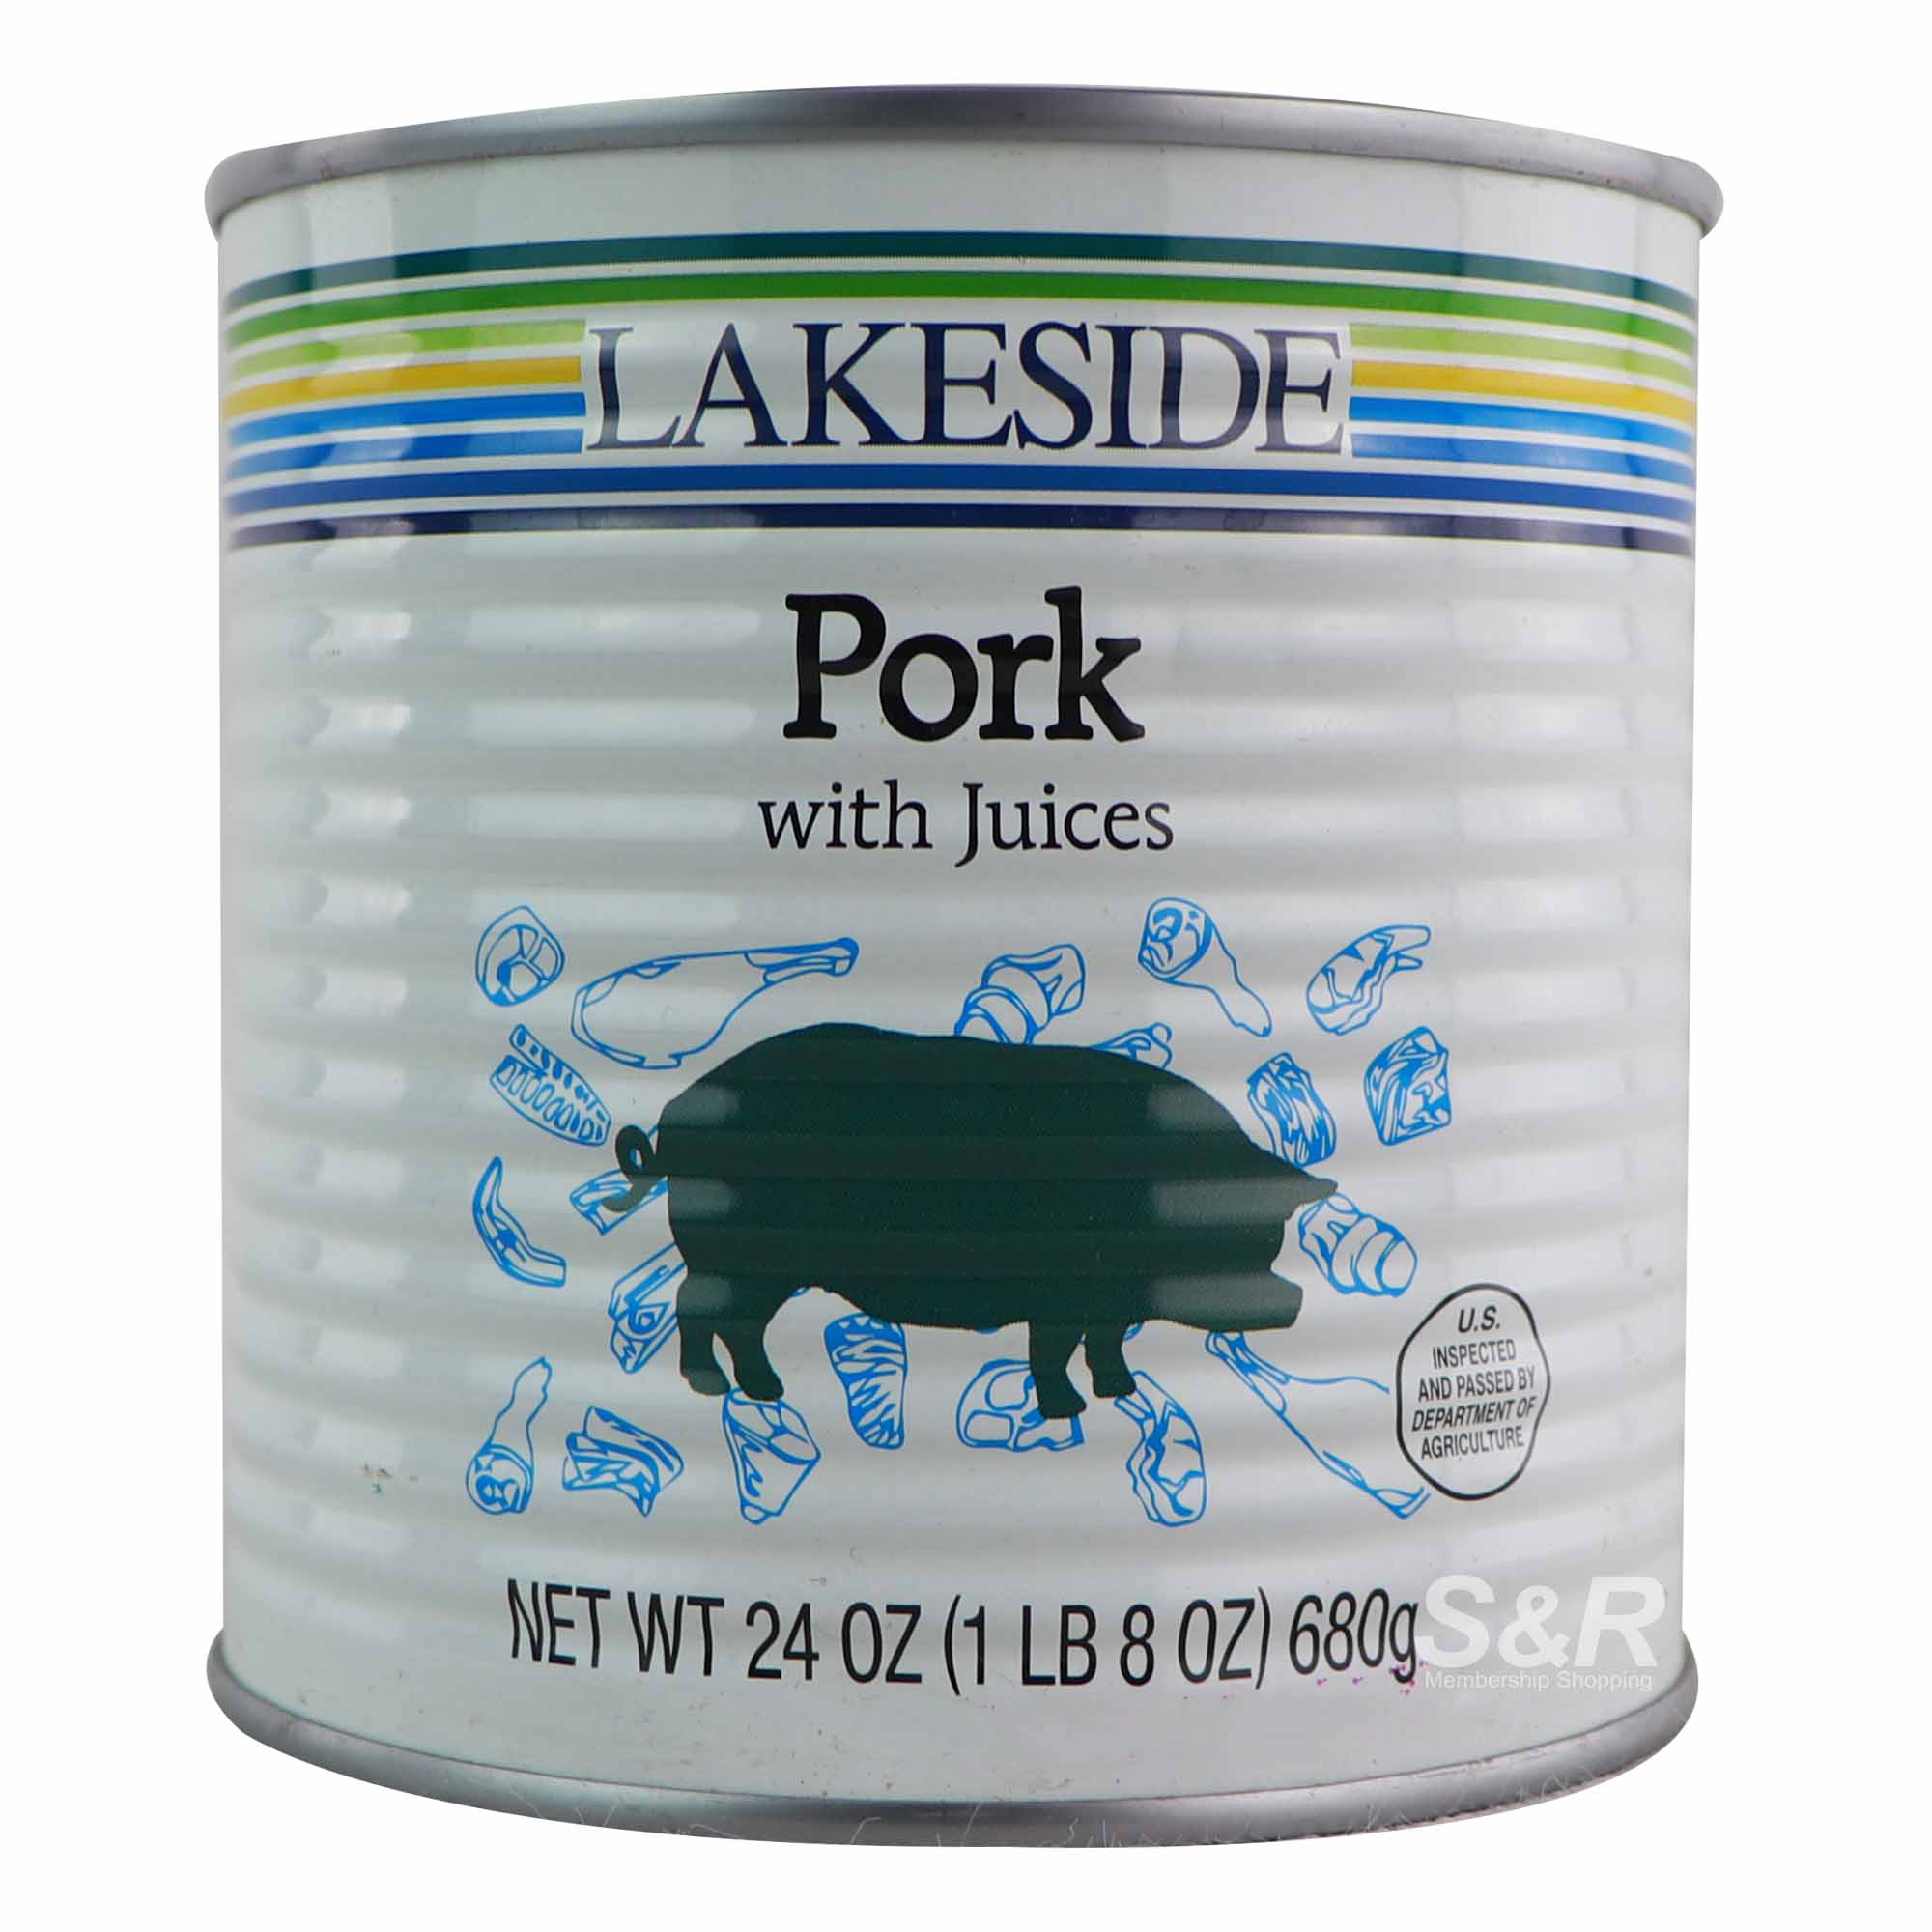 Lakeside Pork with Juices 680g